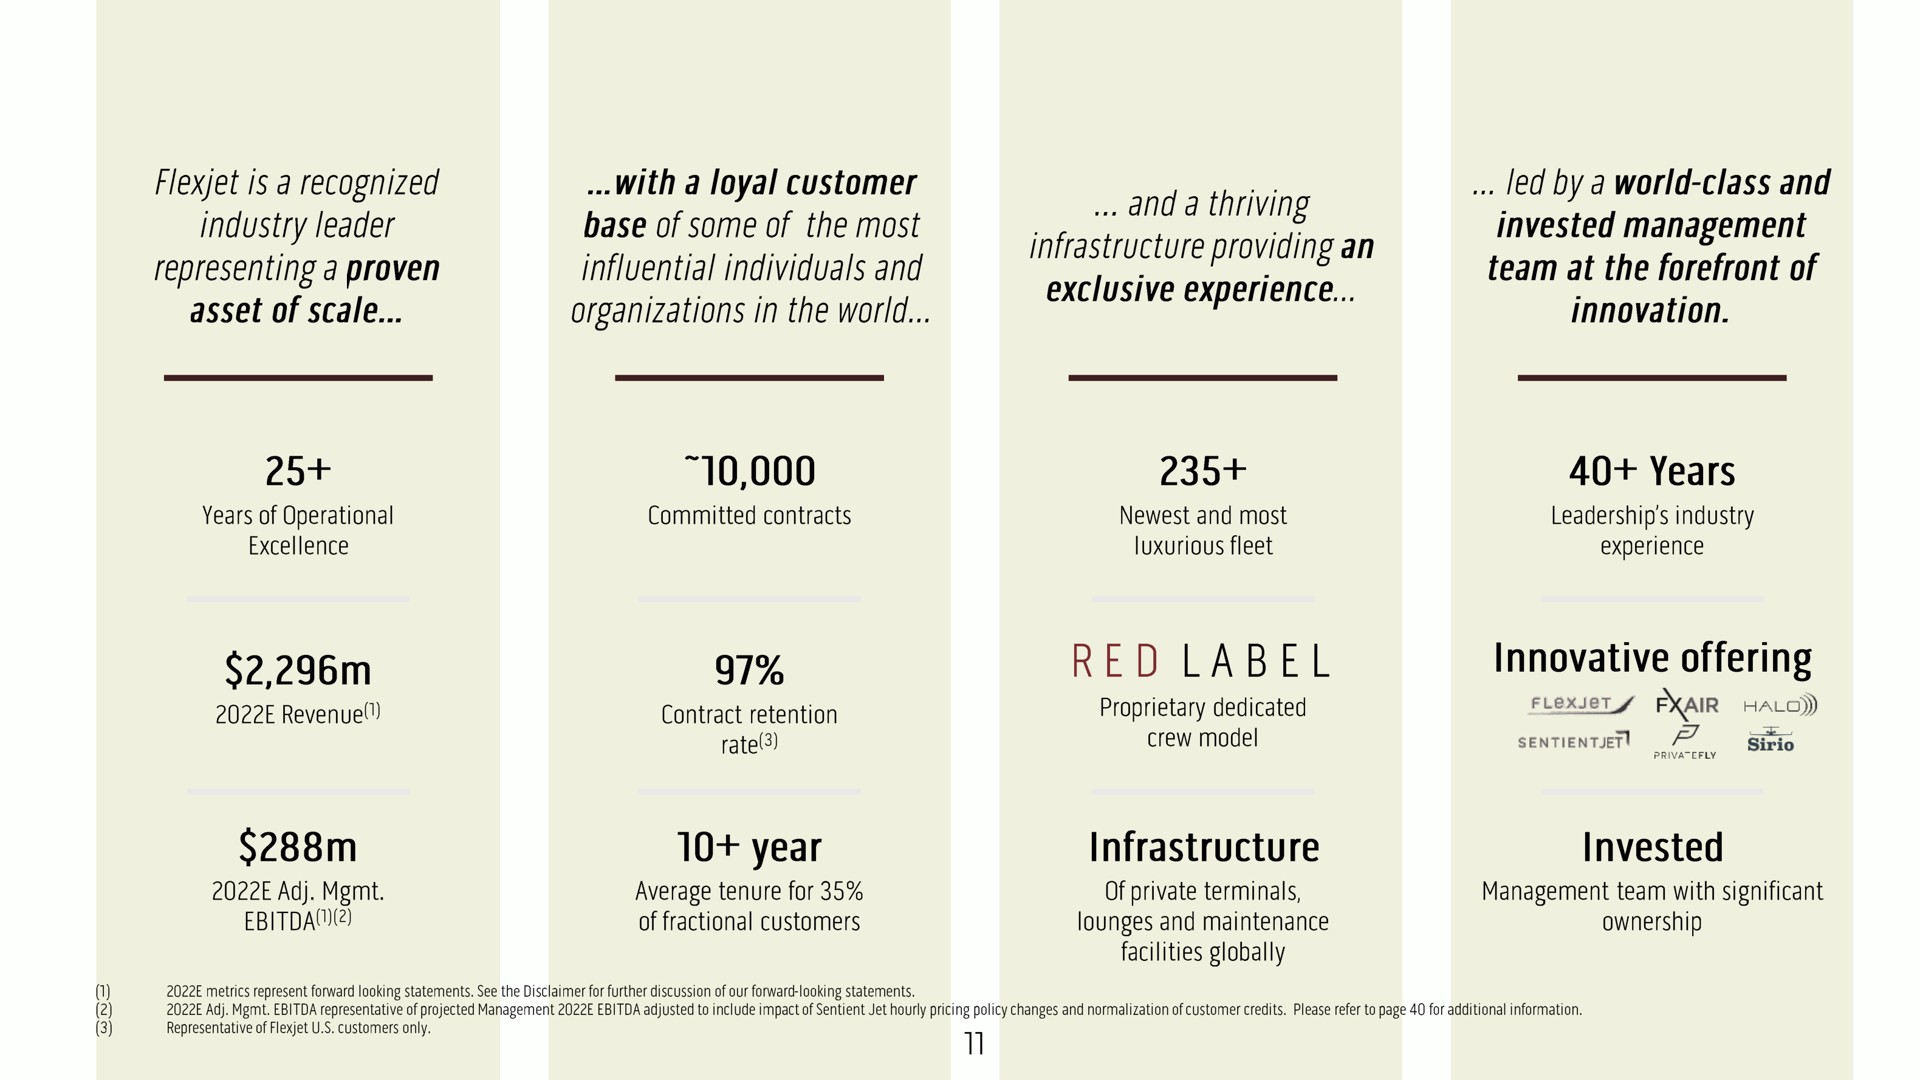 year red label infrastructure innovative offering invested | FlexJet